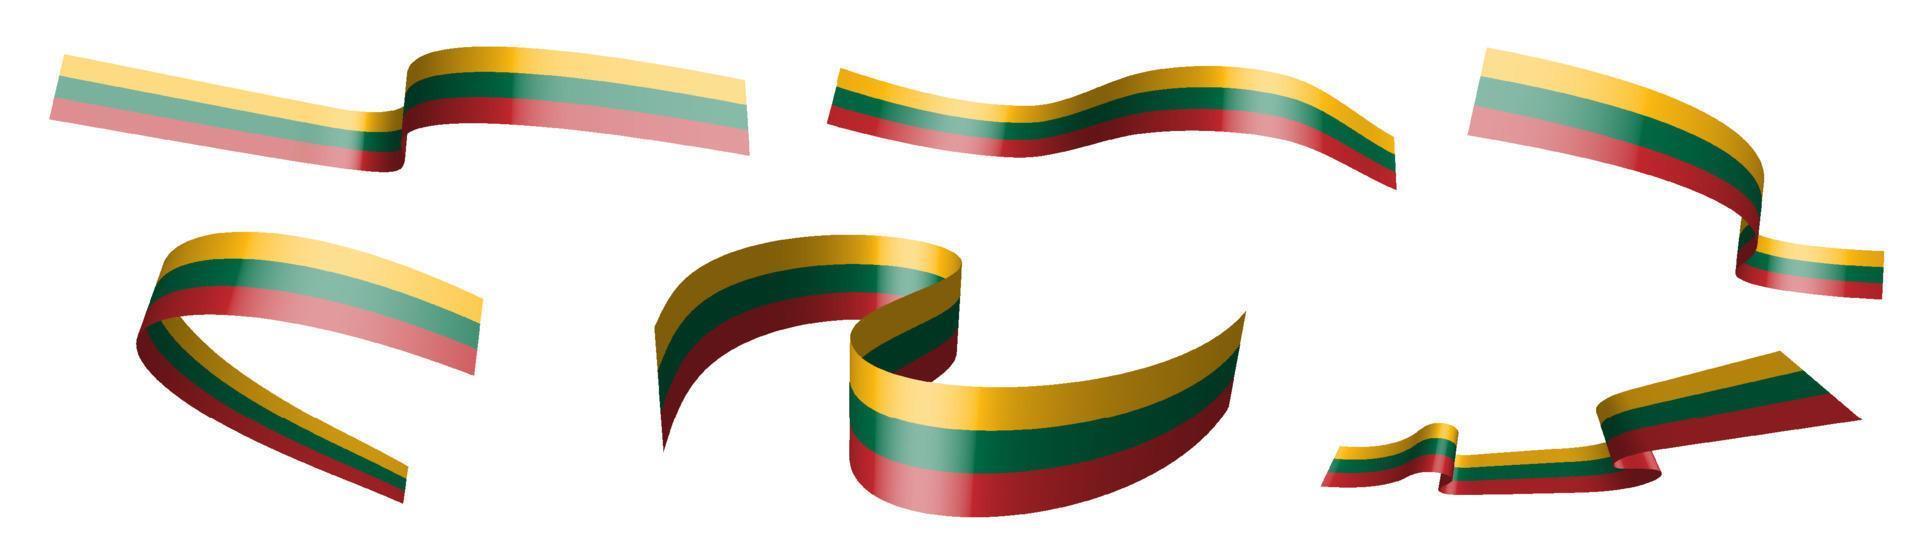 Set of holiday ribbons. Lithuania flag waving in wind. Separation into lower and upper layers. Design element. Vector on white background